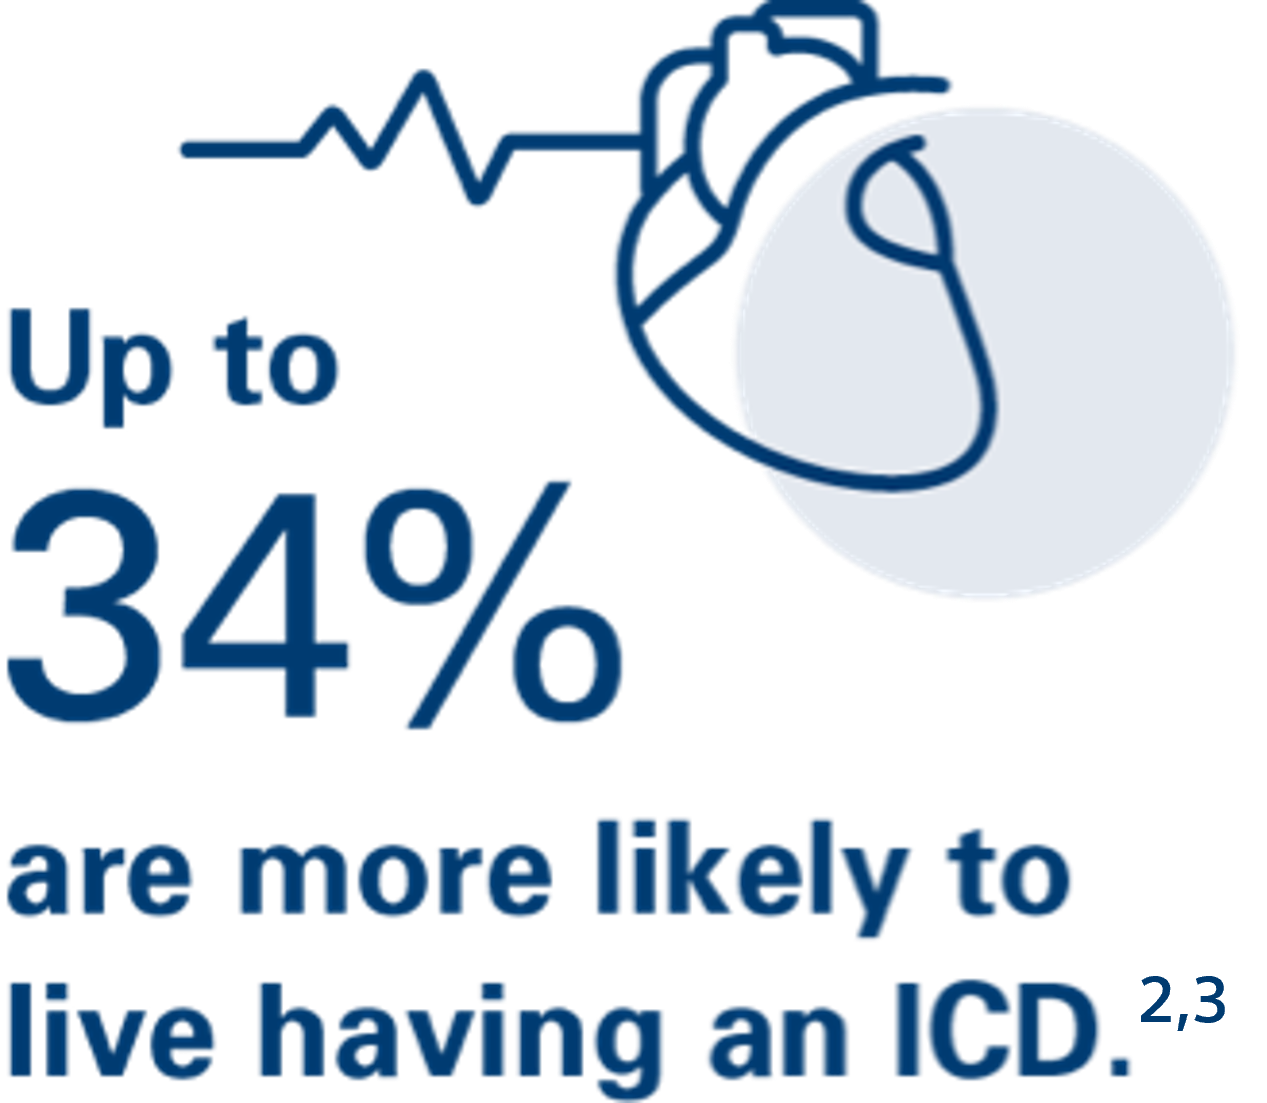 Up to 34% are more likely to live having an ICD.